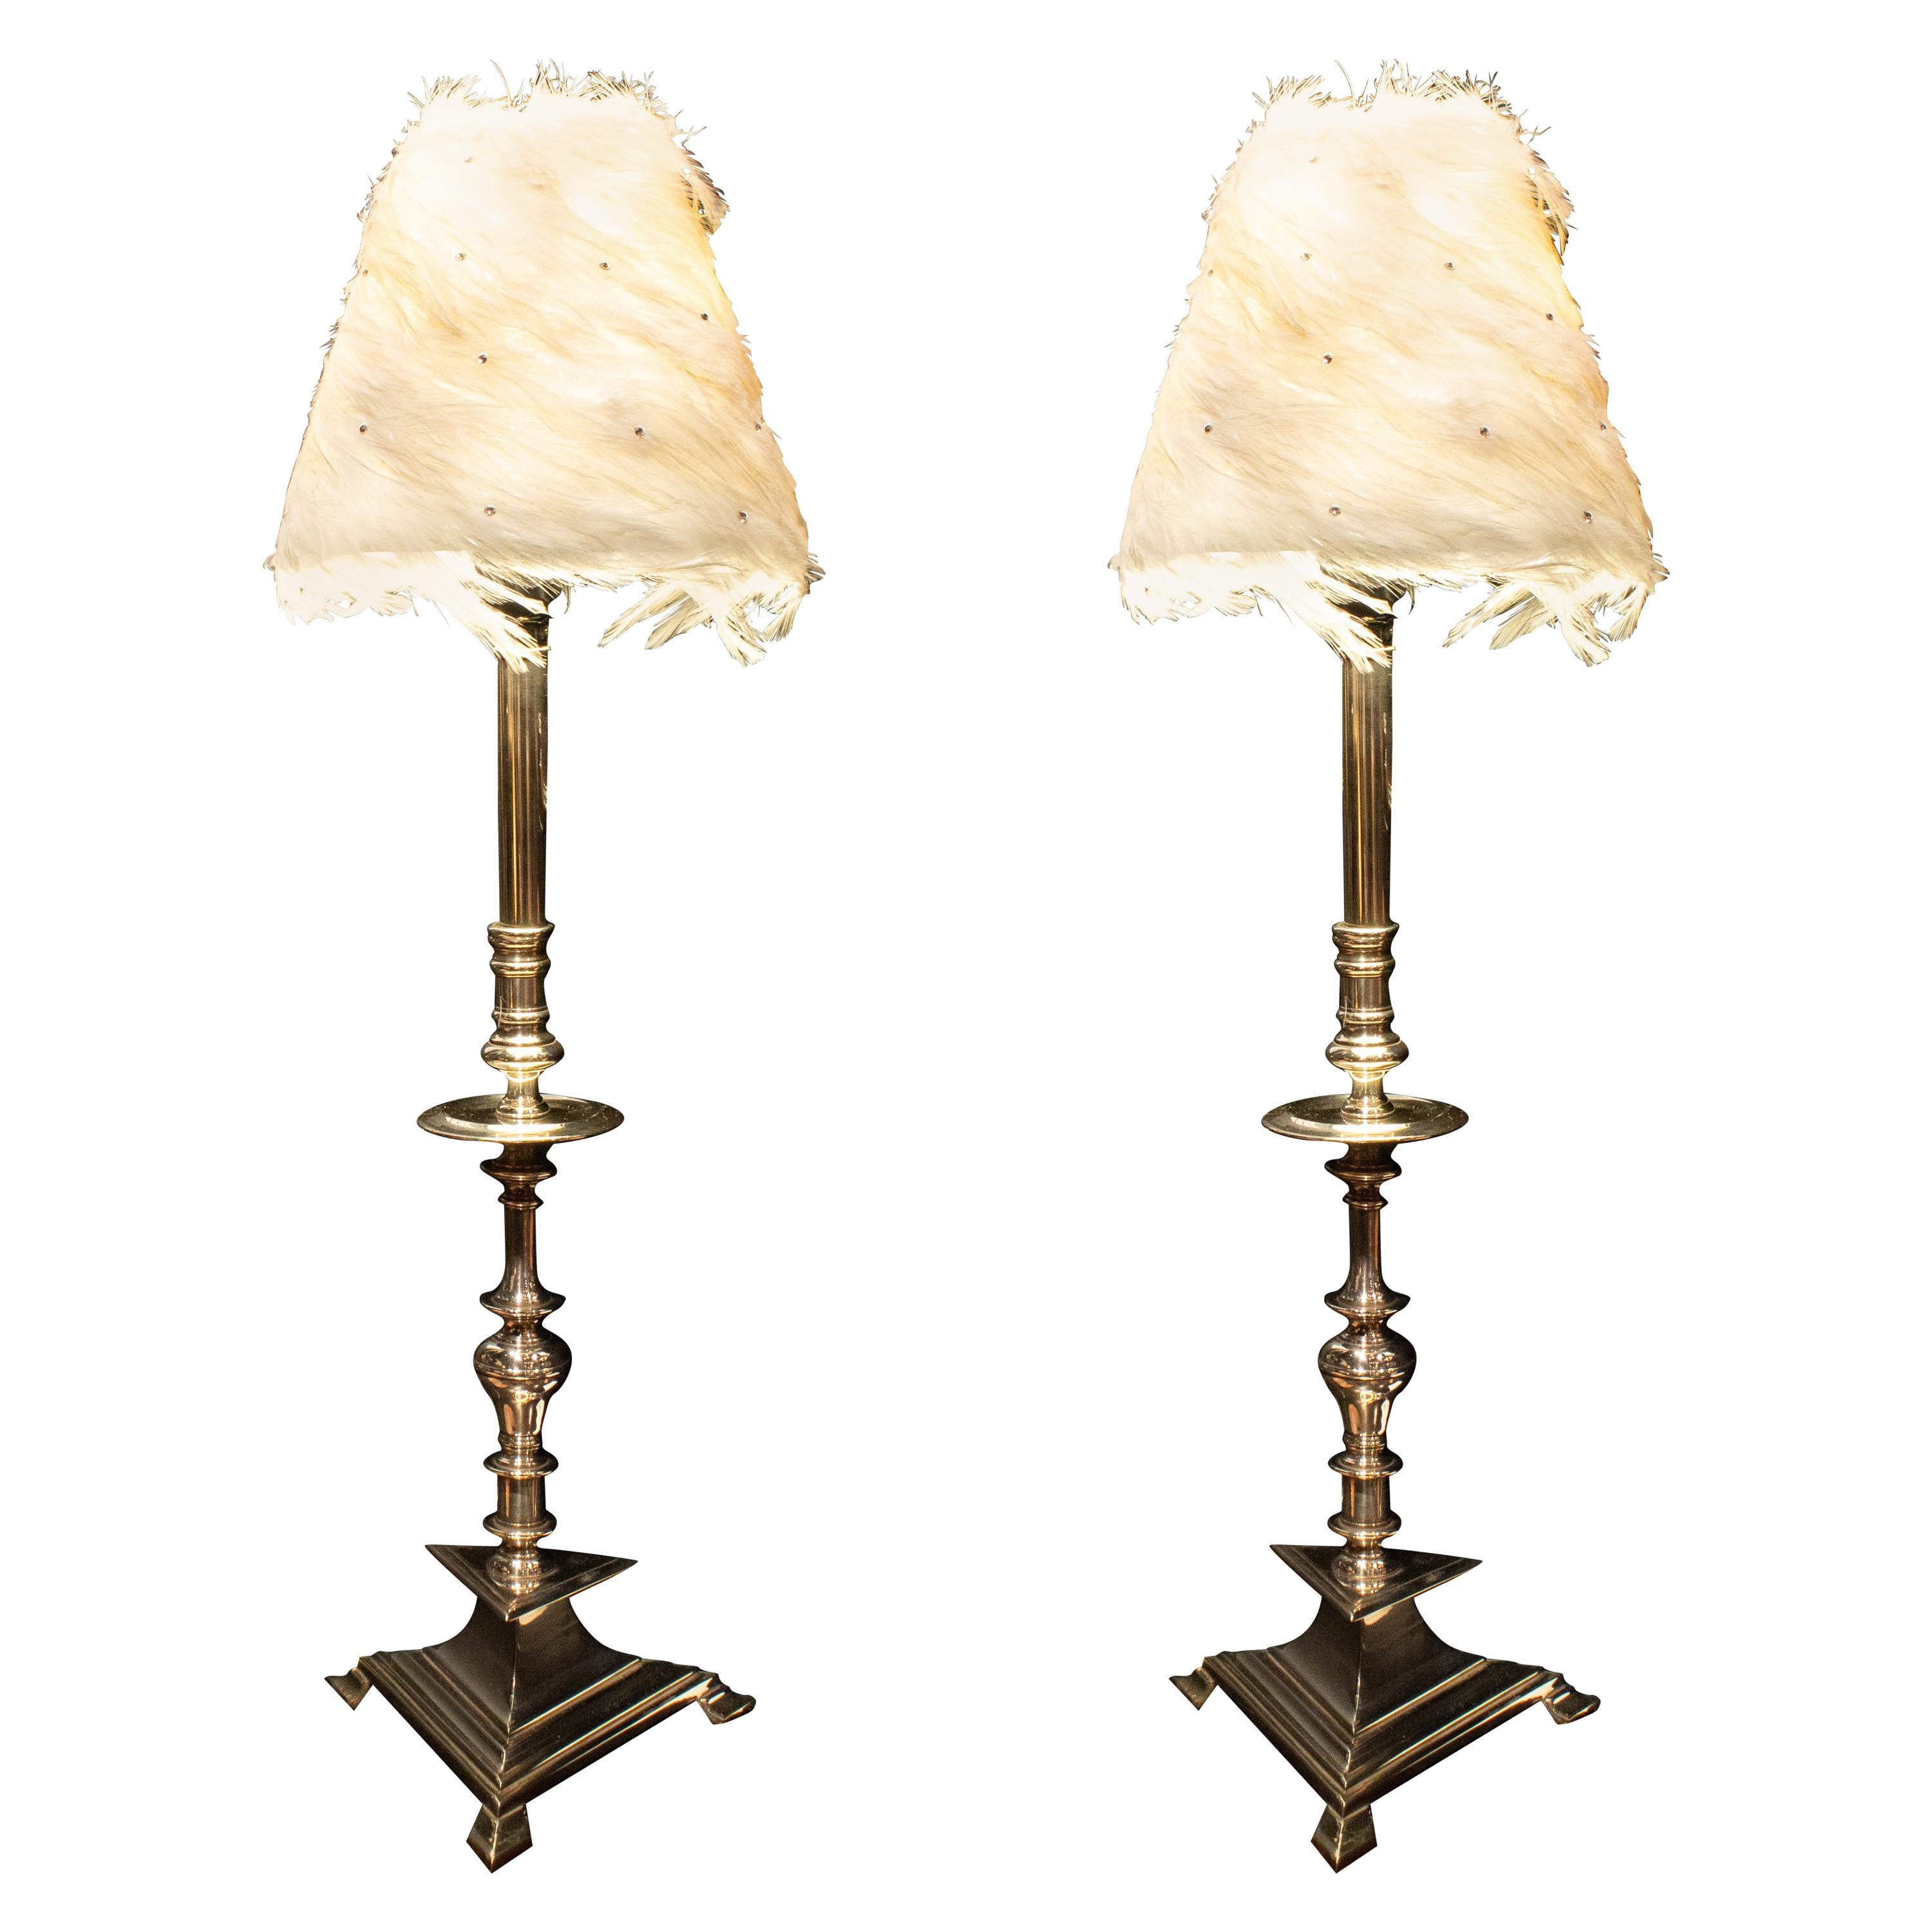 Pair of French 1930s Art Deco Nickel-Plated Table Lamps